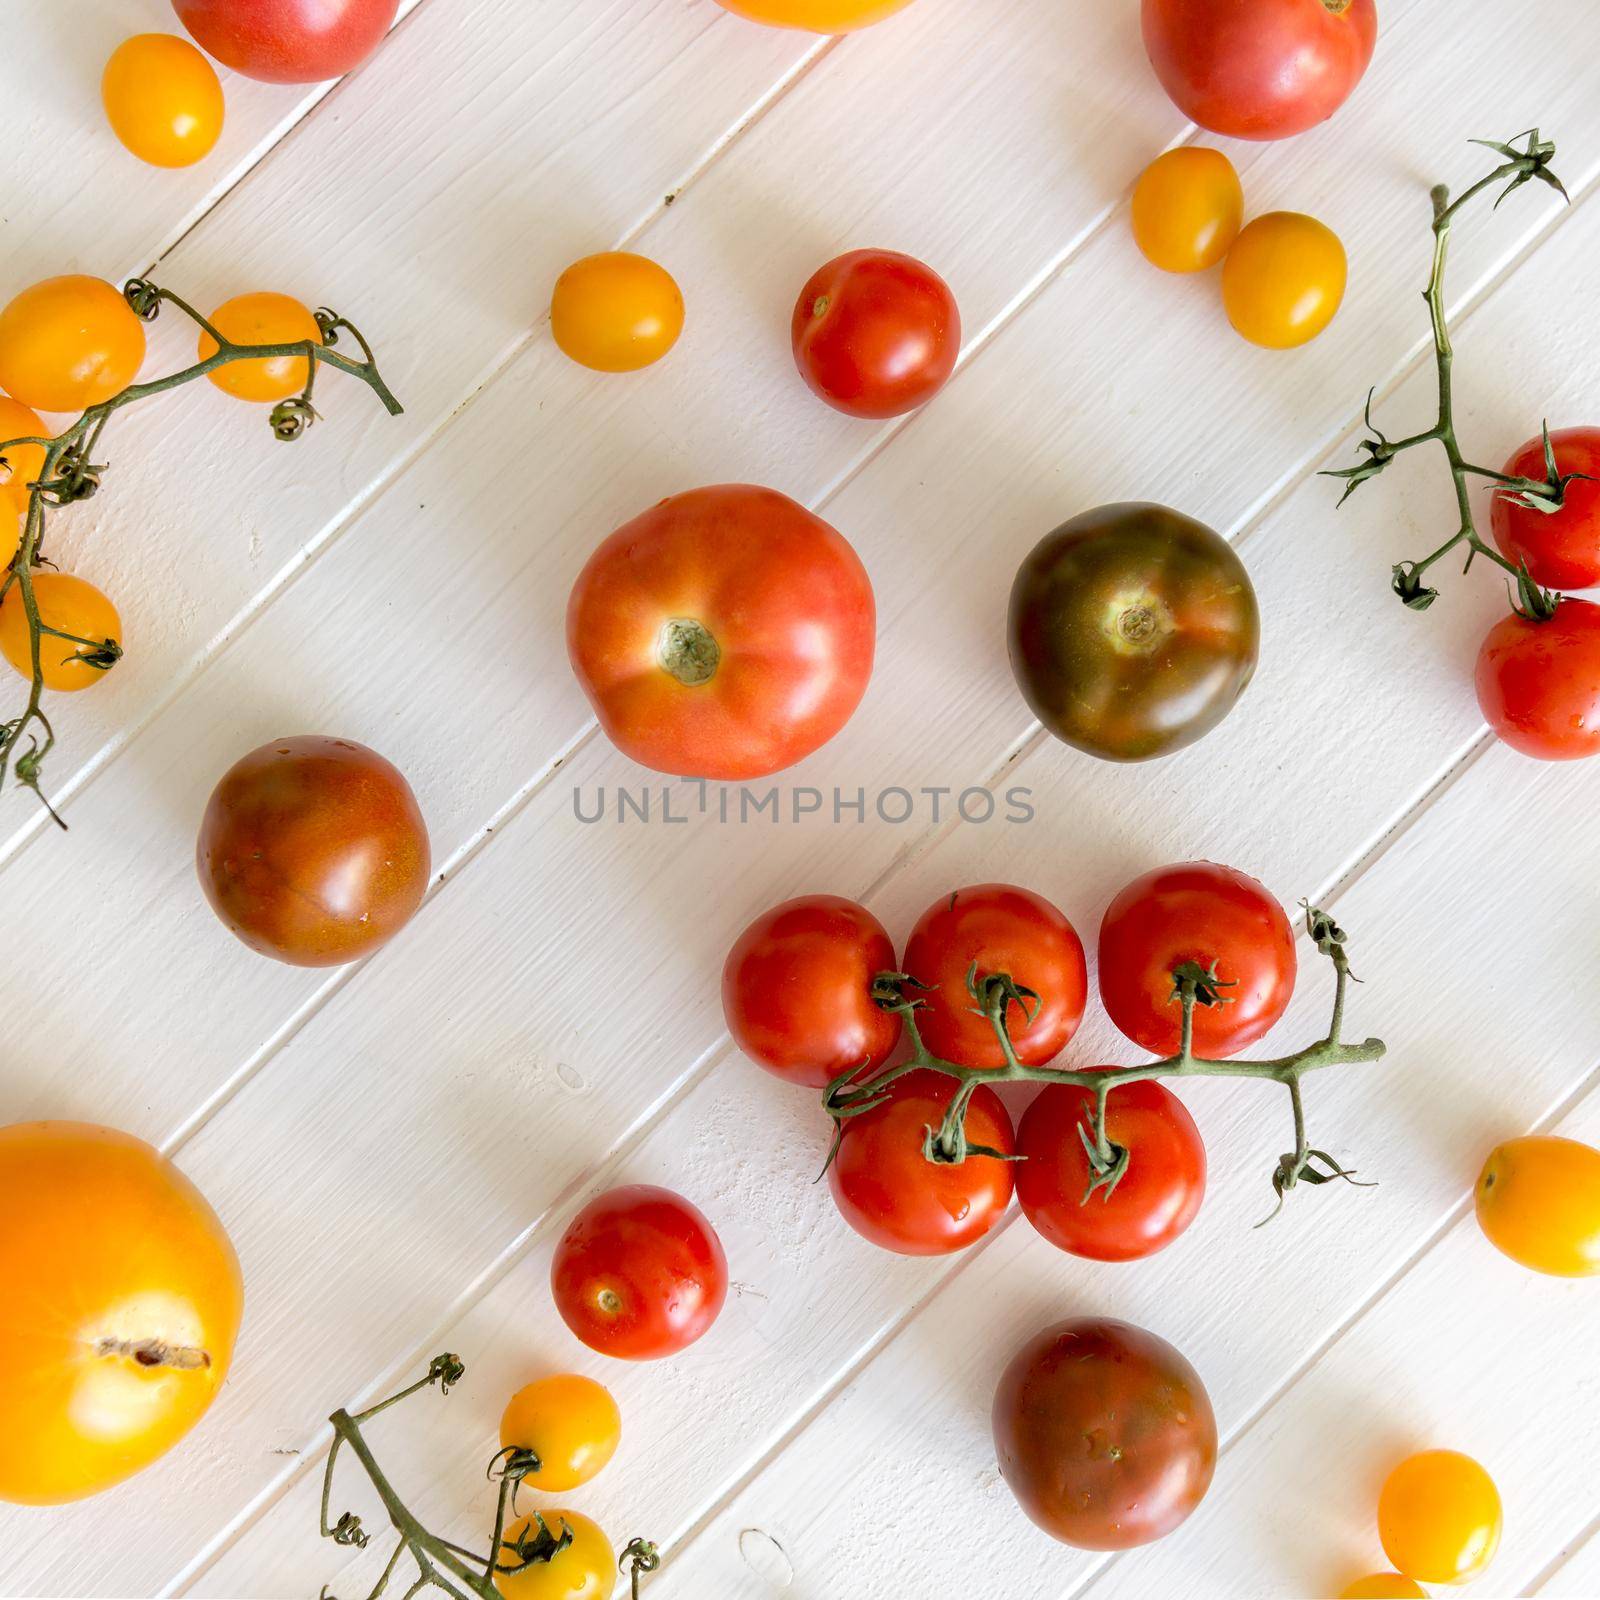 A variety of kinds of tomato on a white wooden background